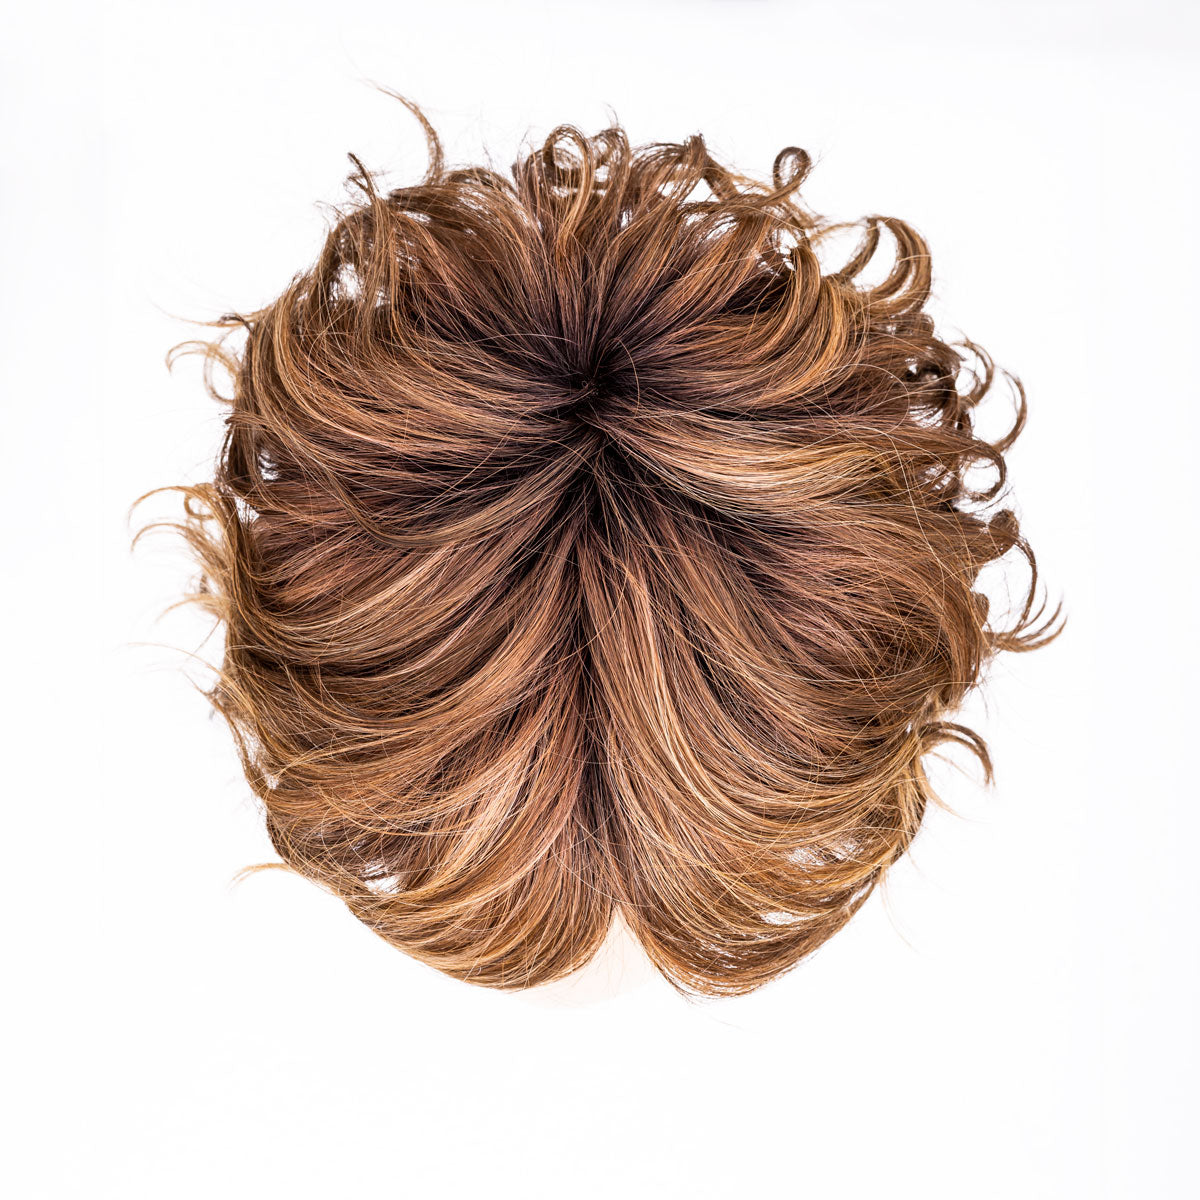 MOCCA ROOTED 830.9.20 | Medium Brown, Light Brown, and Light Auburn blend with Dark Roots